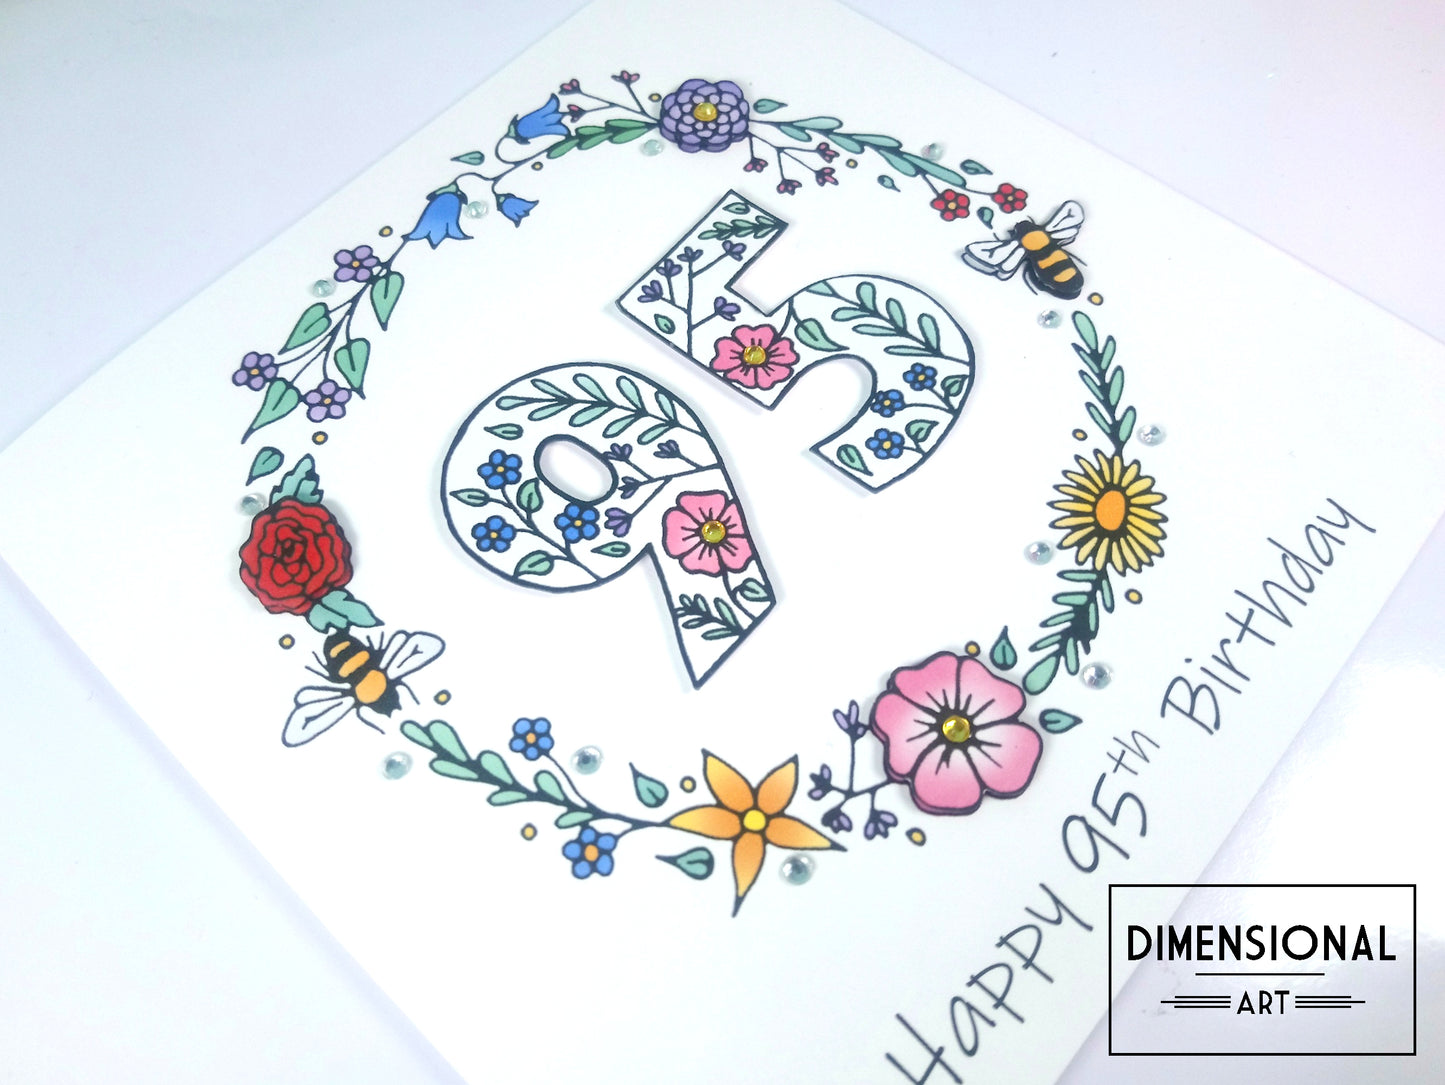 95th Flowers and Bees Birthday Card